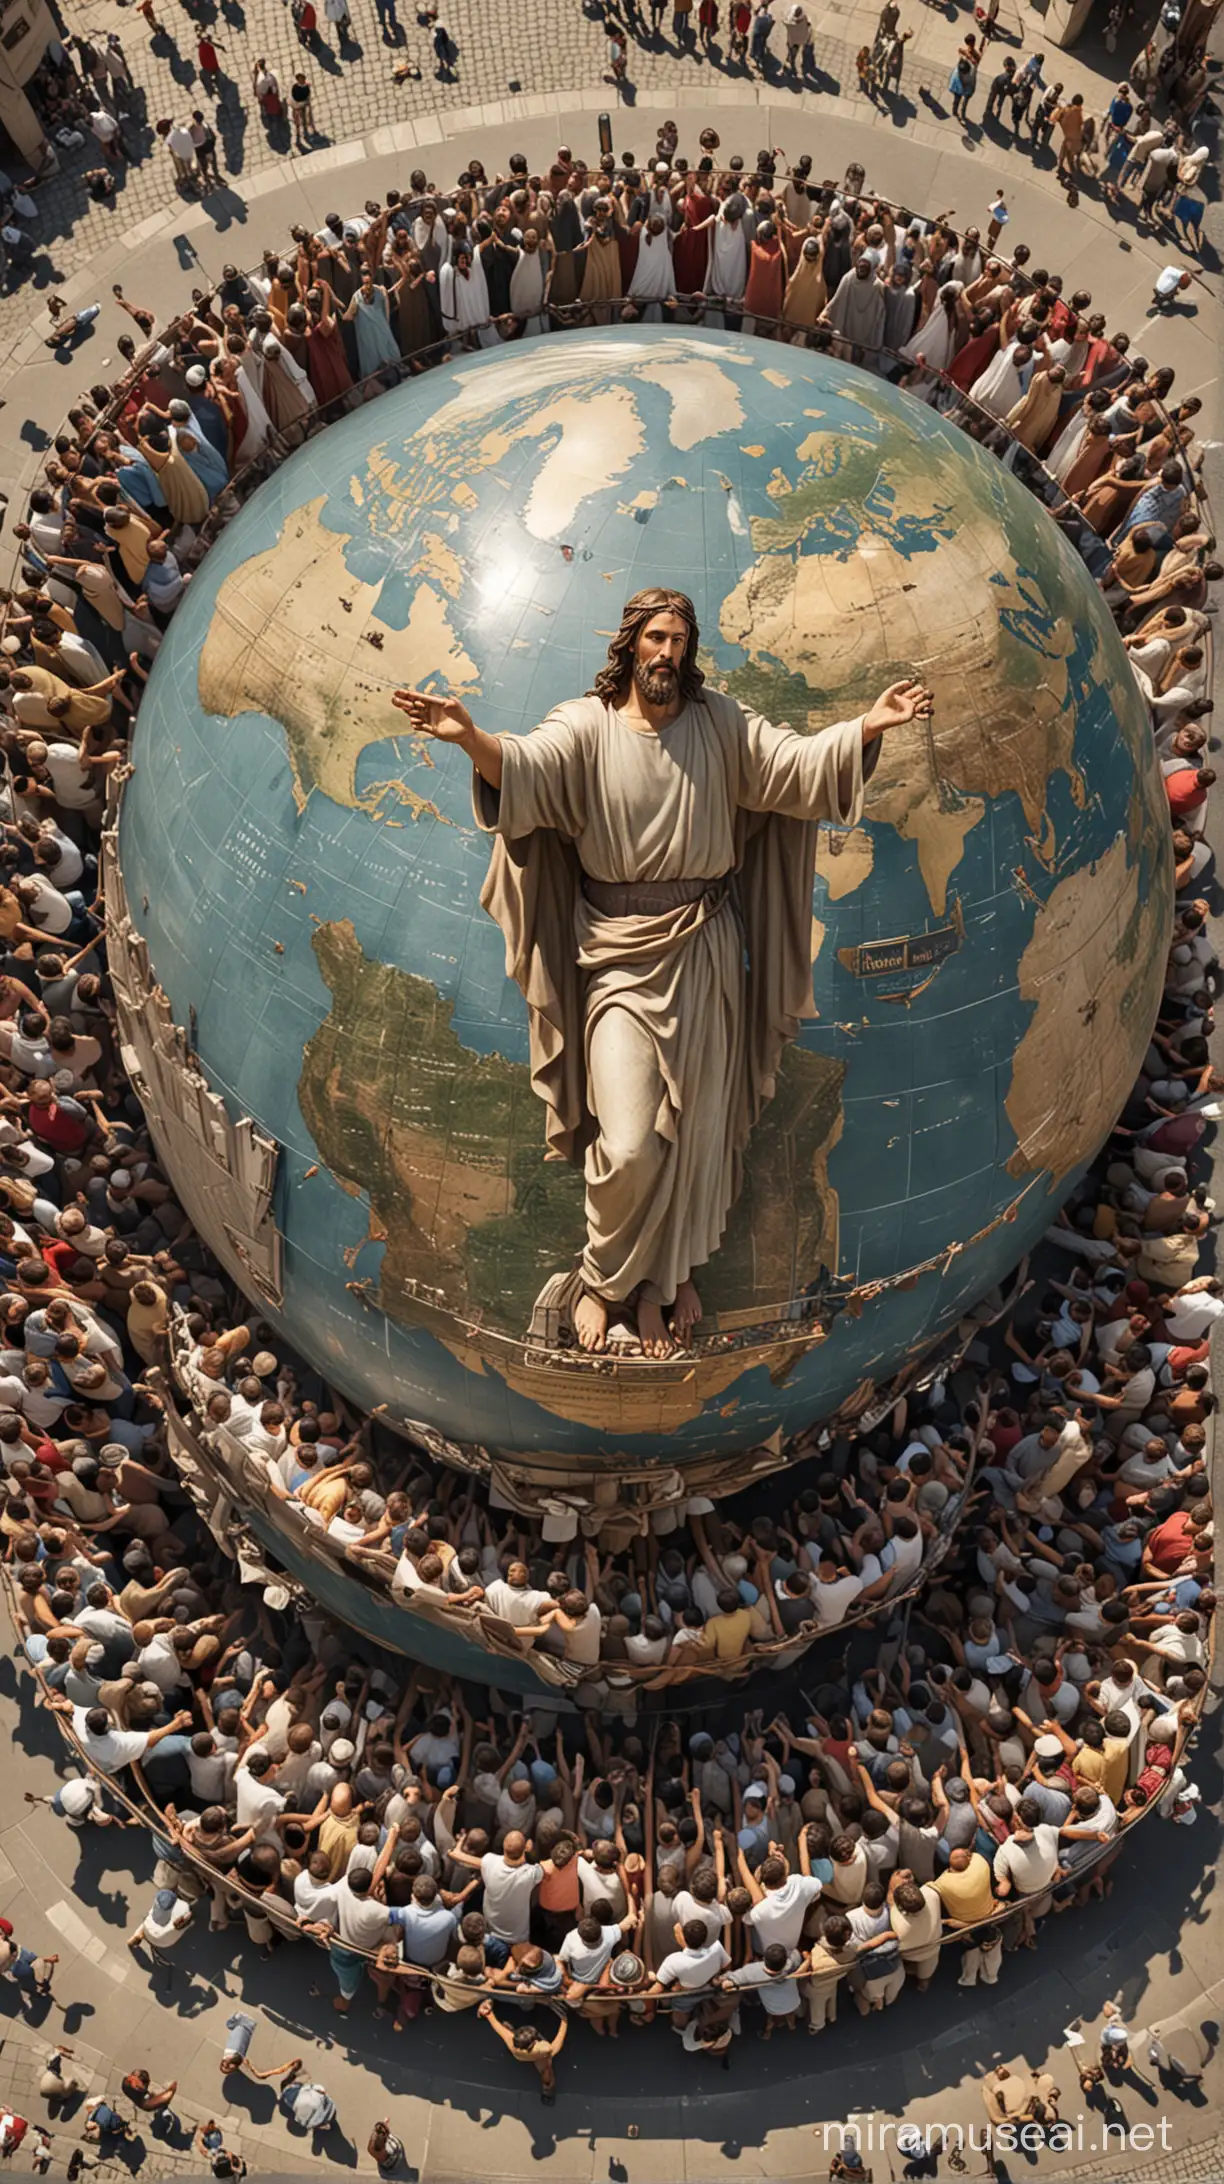 Jesus Christ in a Crowded Square with a Globe